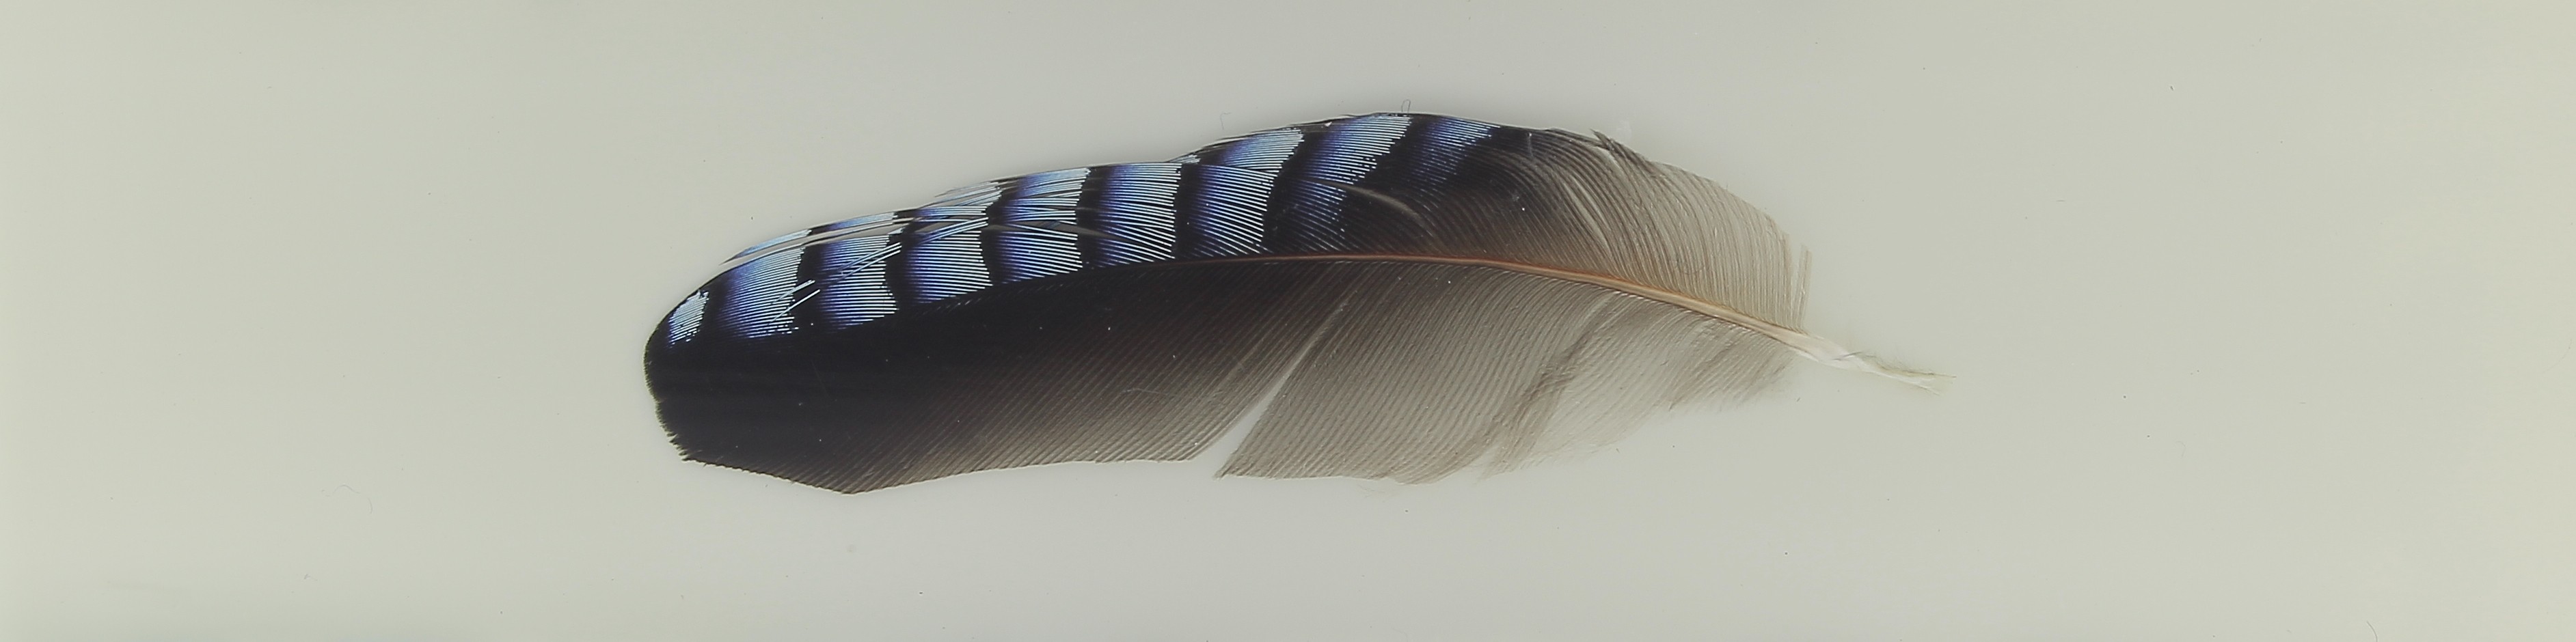 Inclusion, a jay feather white background